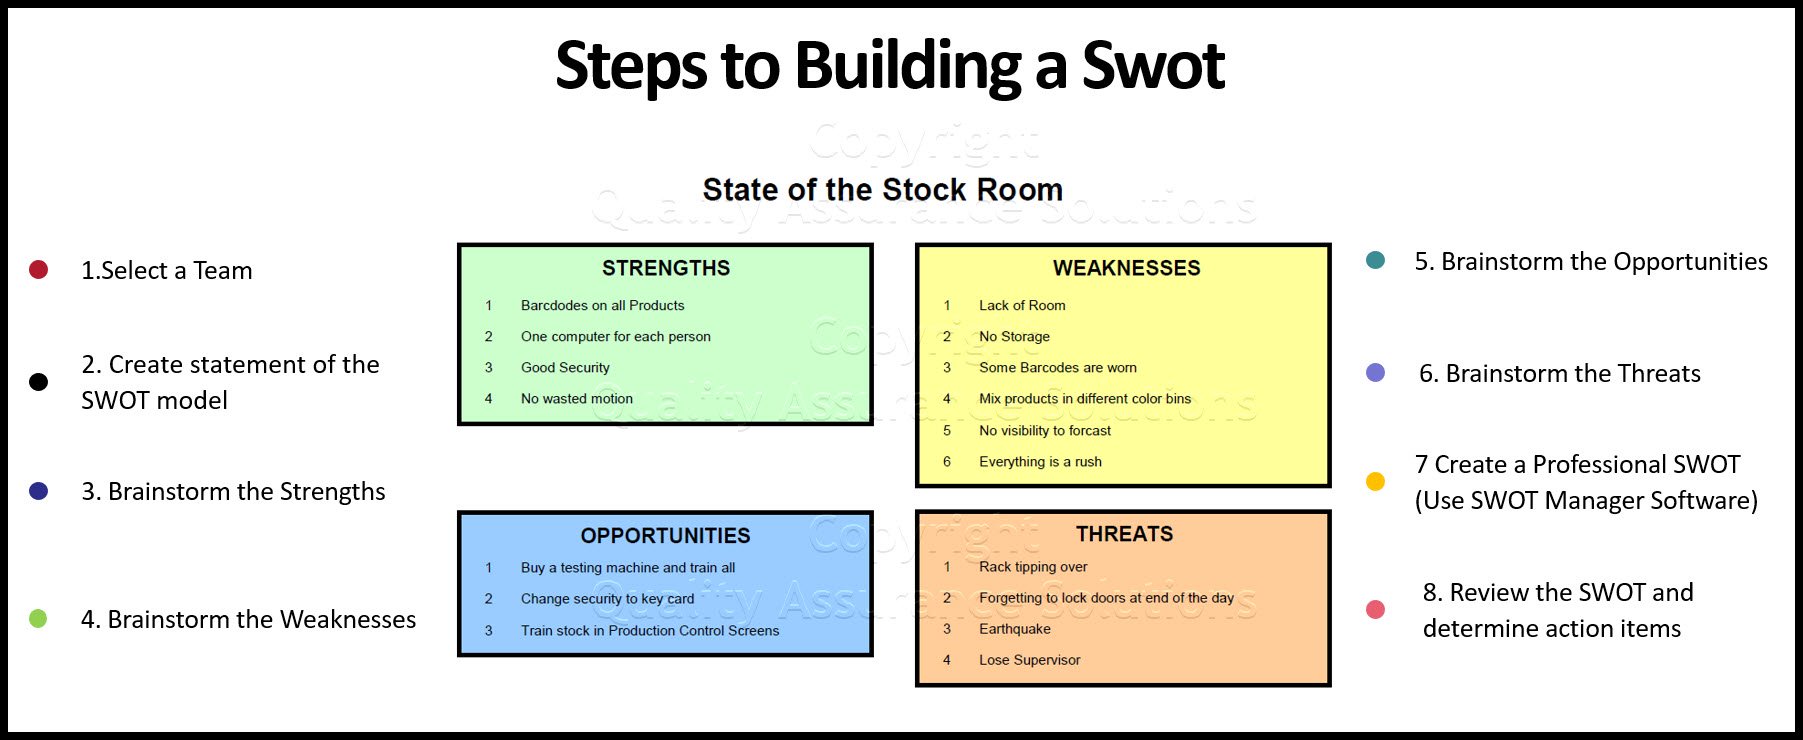 Step by Step instructions for applying the SWOT model and using SWOT techniques. Learn when to use SWOT reports and generate professional SWOT charts